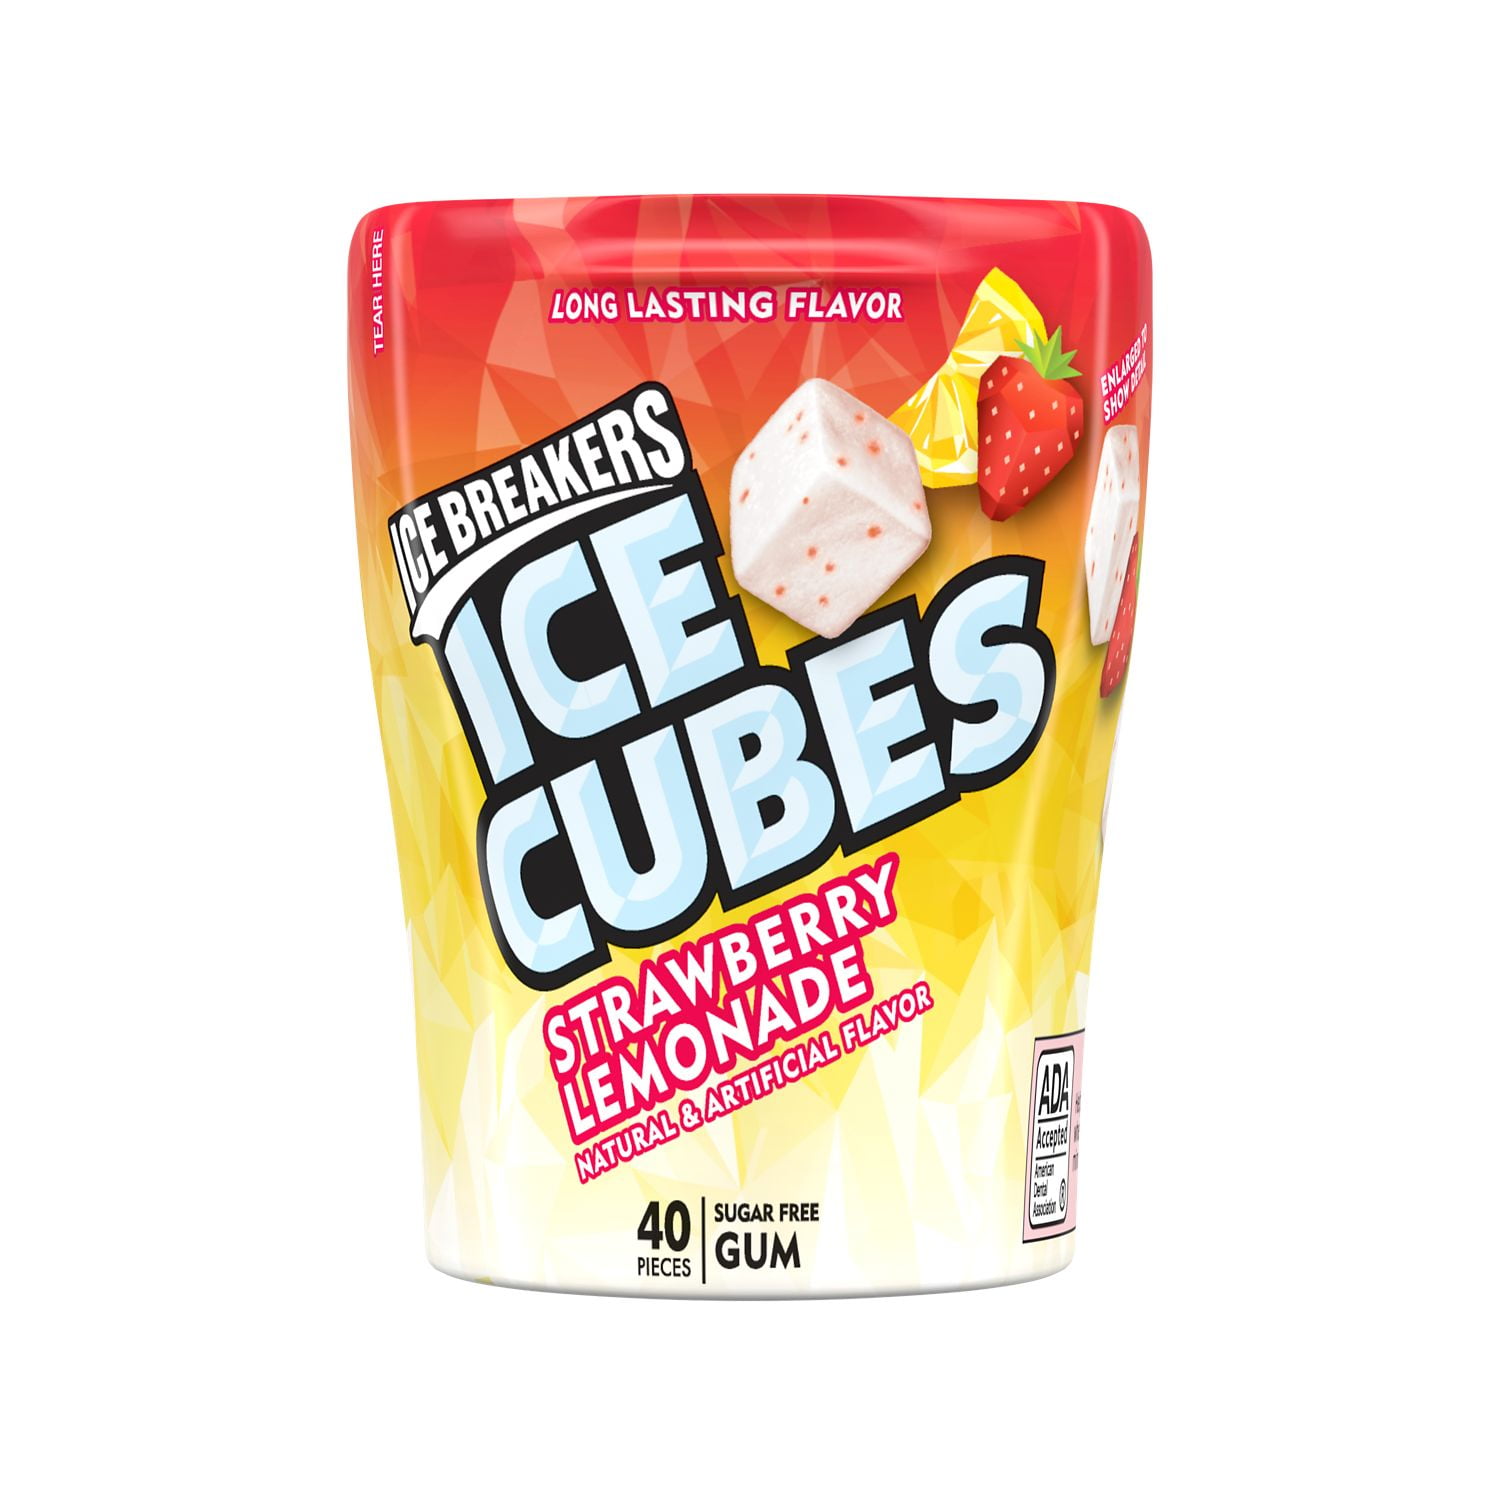 ICE BREAKERS, ICE CUBES Strawberry Lemonade flavored Sugar Free Chewing Gum, Xylitol Gum, 40 count, Bottle